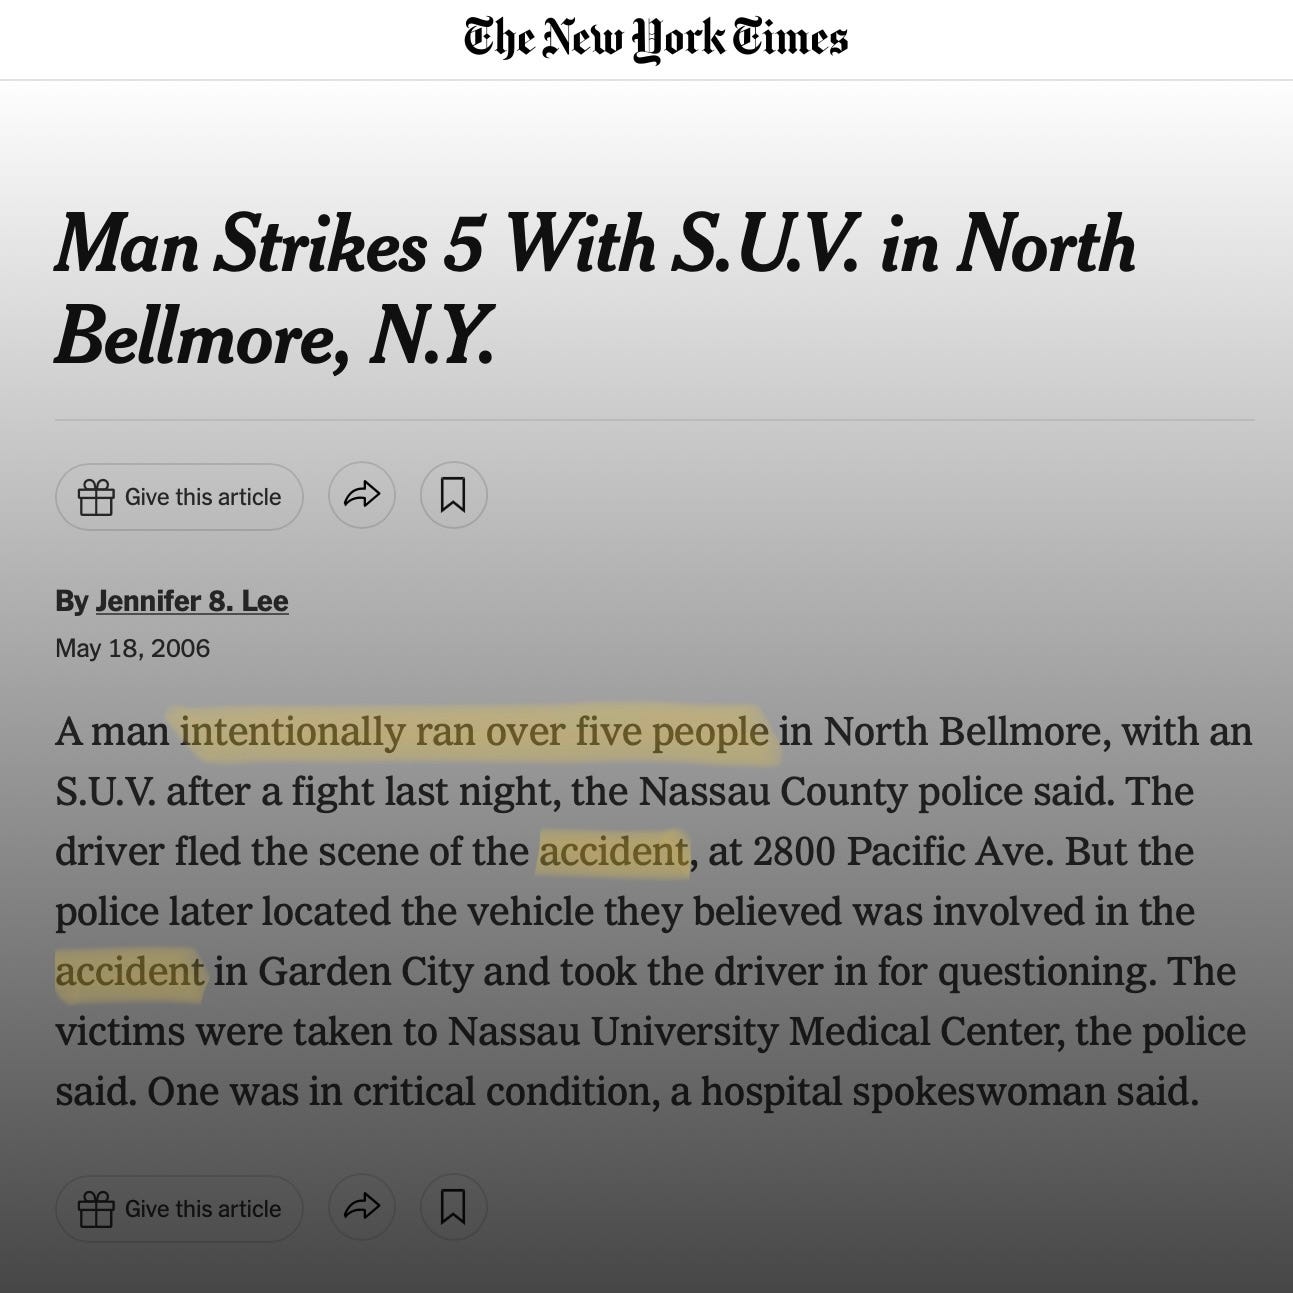 An intentional hit, but the NYT—NYT!—still couldn't help it.